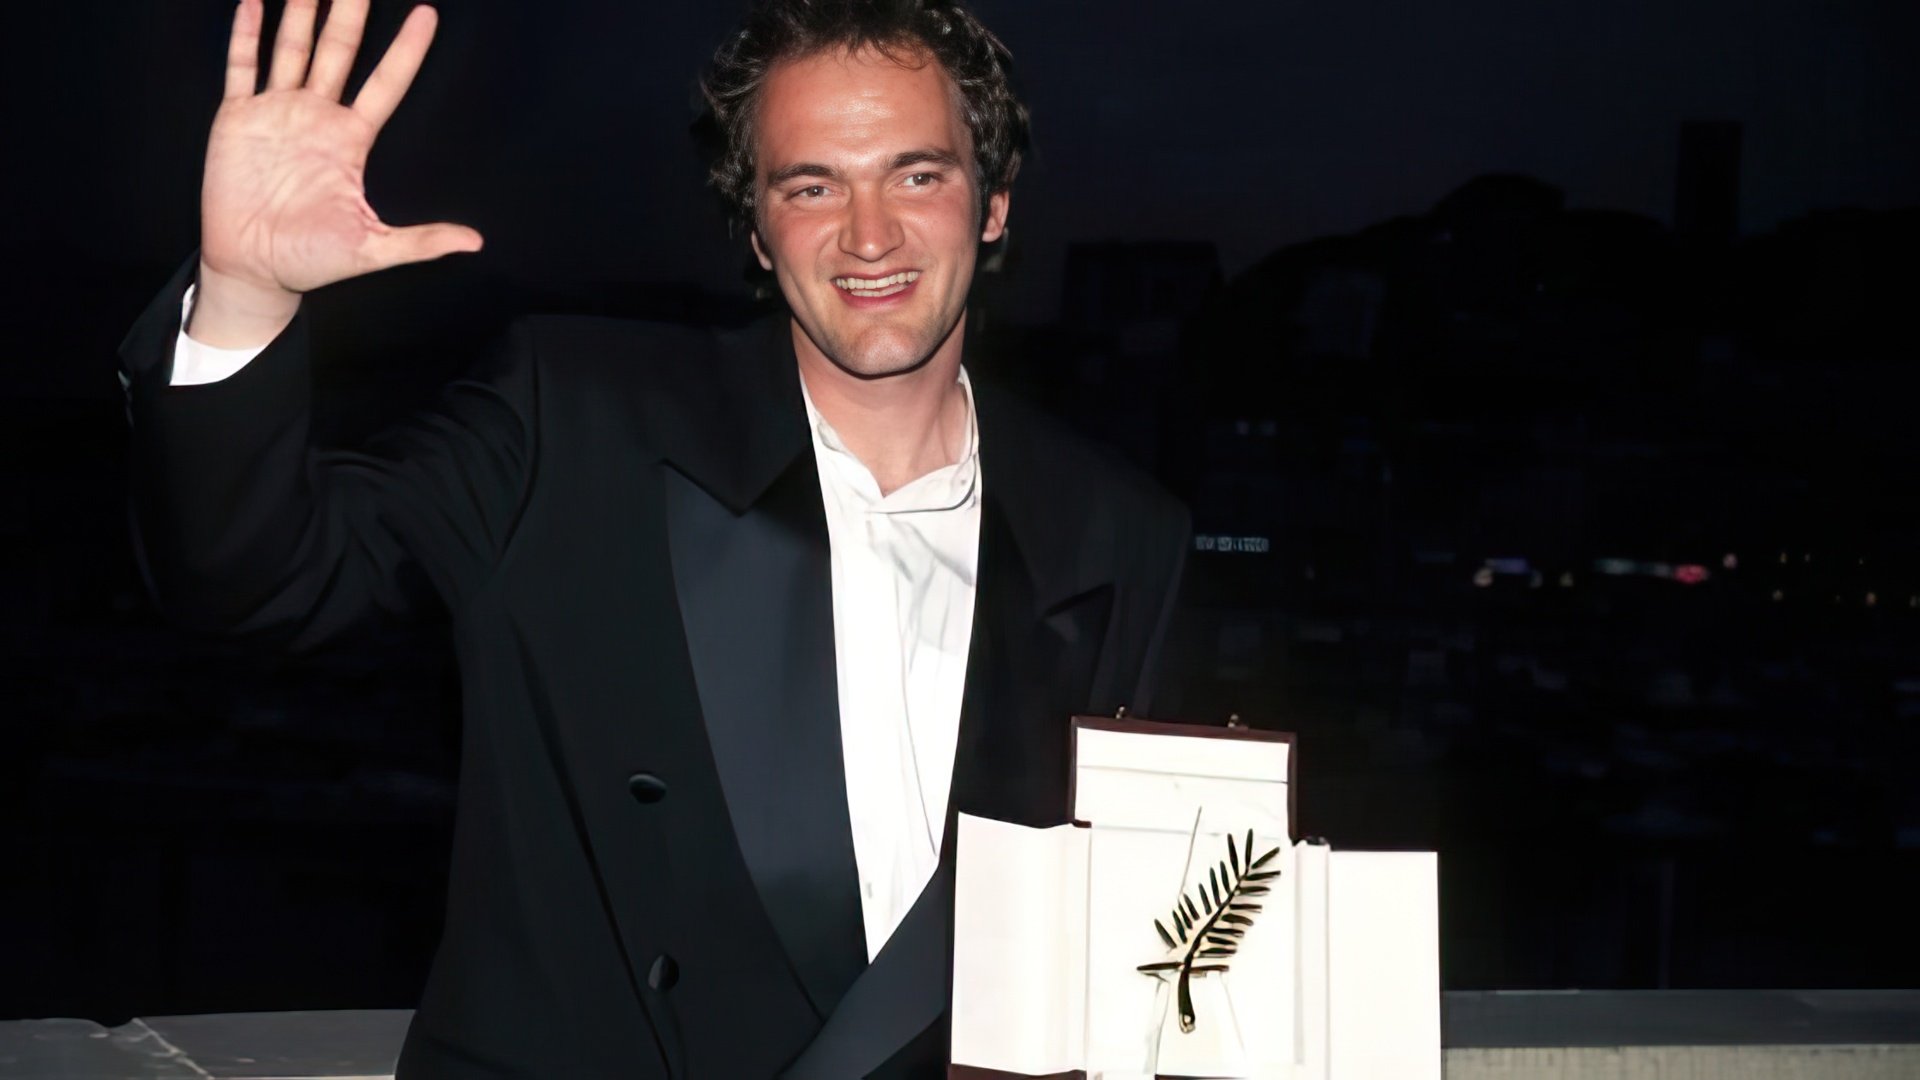 Tarantino received the Palme d’Or at the Cannes Film Festival